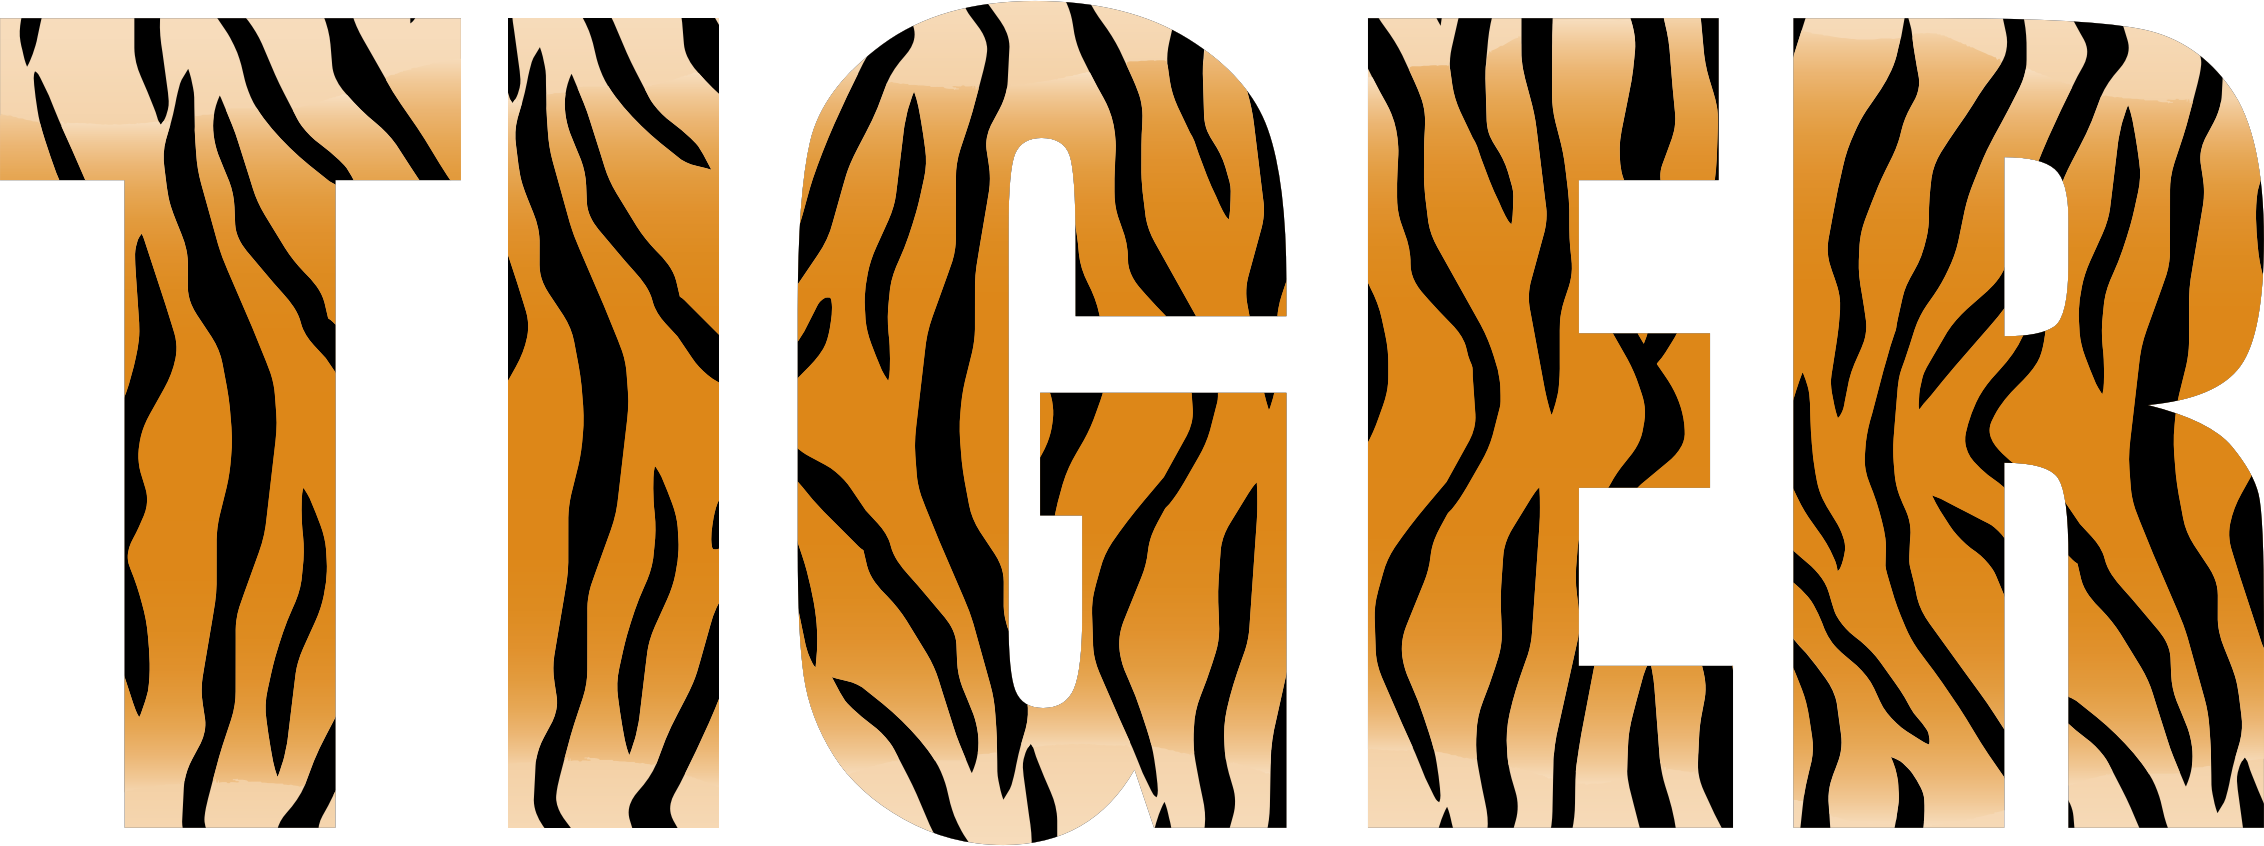 This Free Icons Png Design Of Tiger Typography - Tiger Png (2264x846)